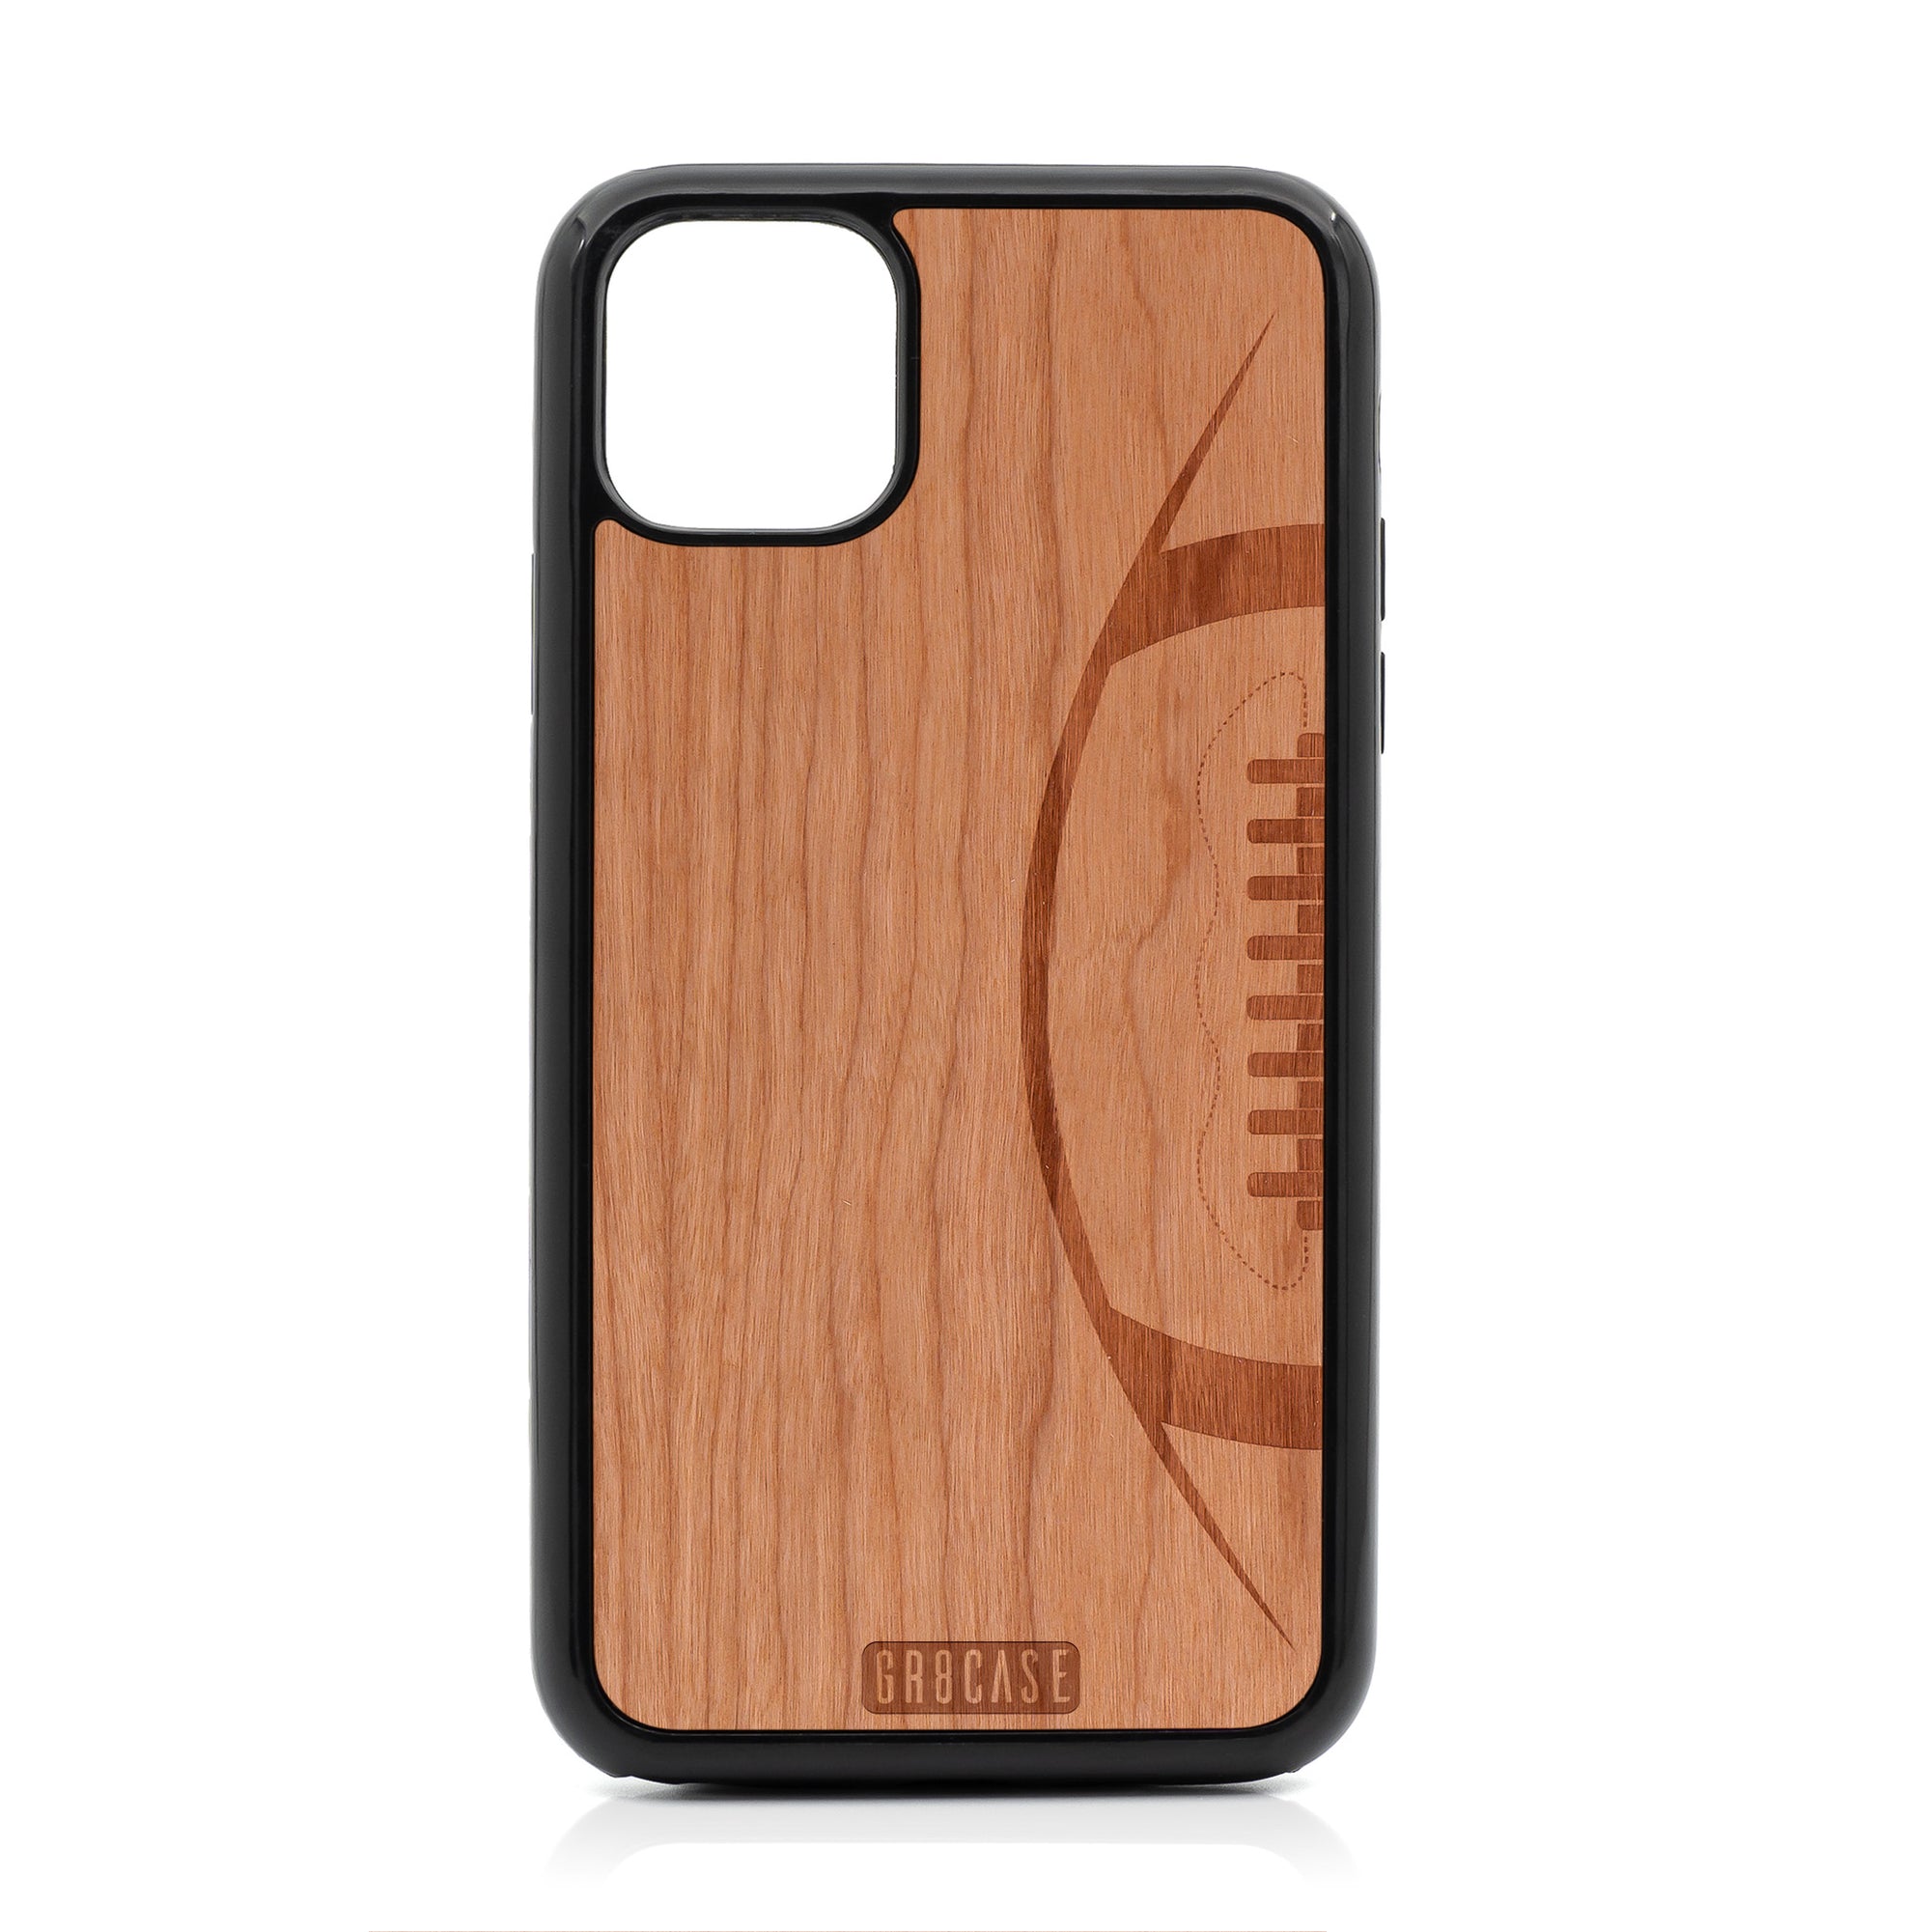 Football Design Wood Case For iPhone 11 Pro Max by GR8CASE